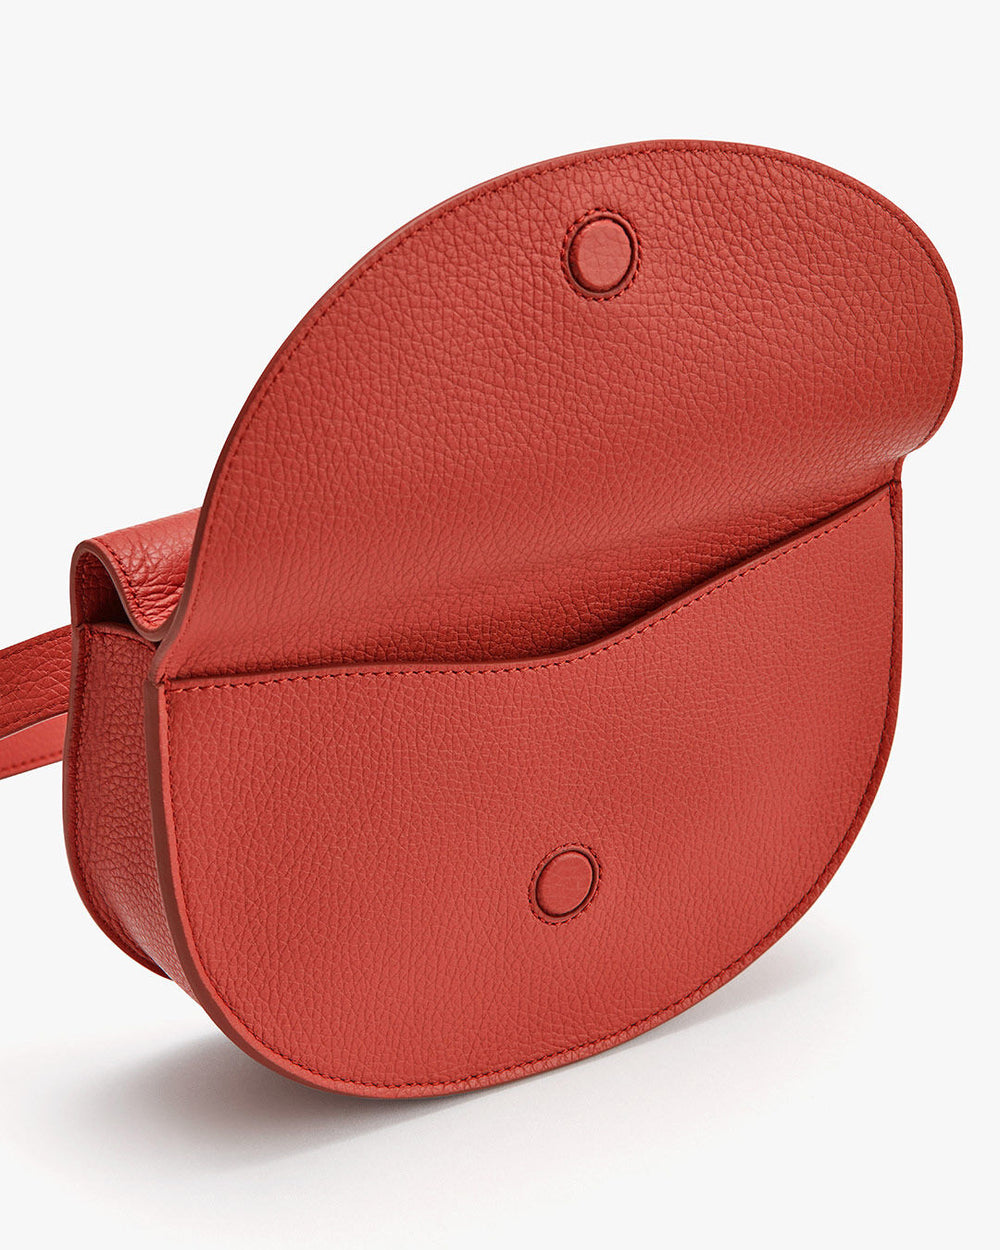 A small saddle-shaped shoulder bag with a flap closure and visible snap buttons.